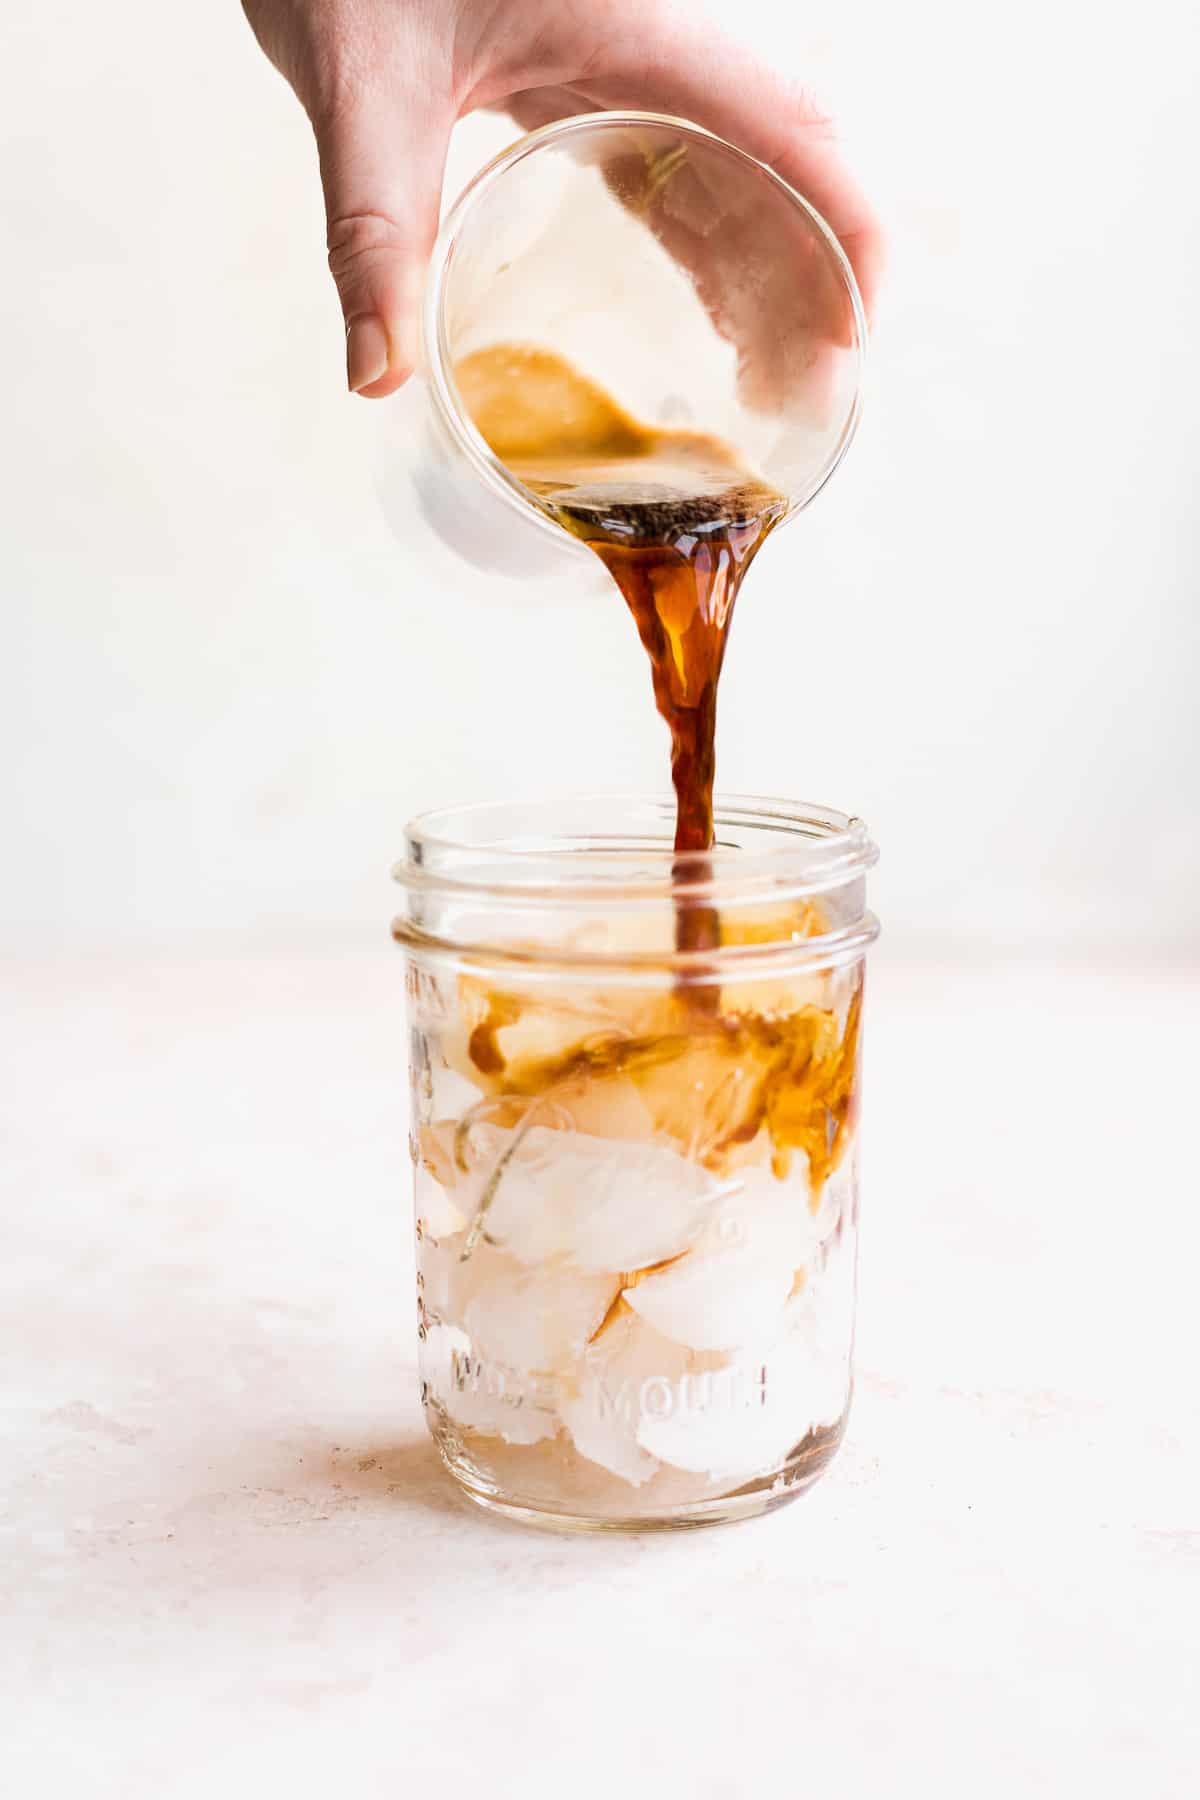 Hand pouring coffee into a glass with ice.